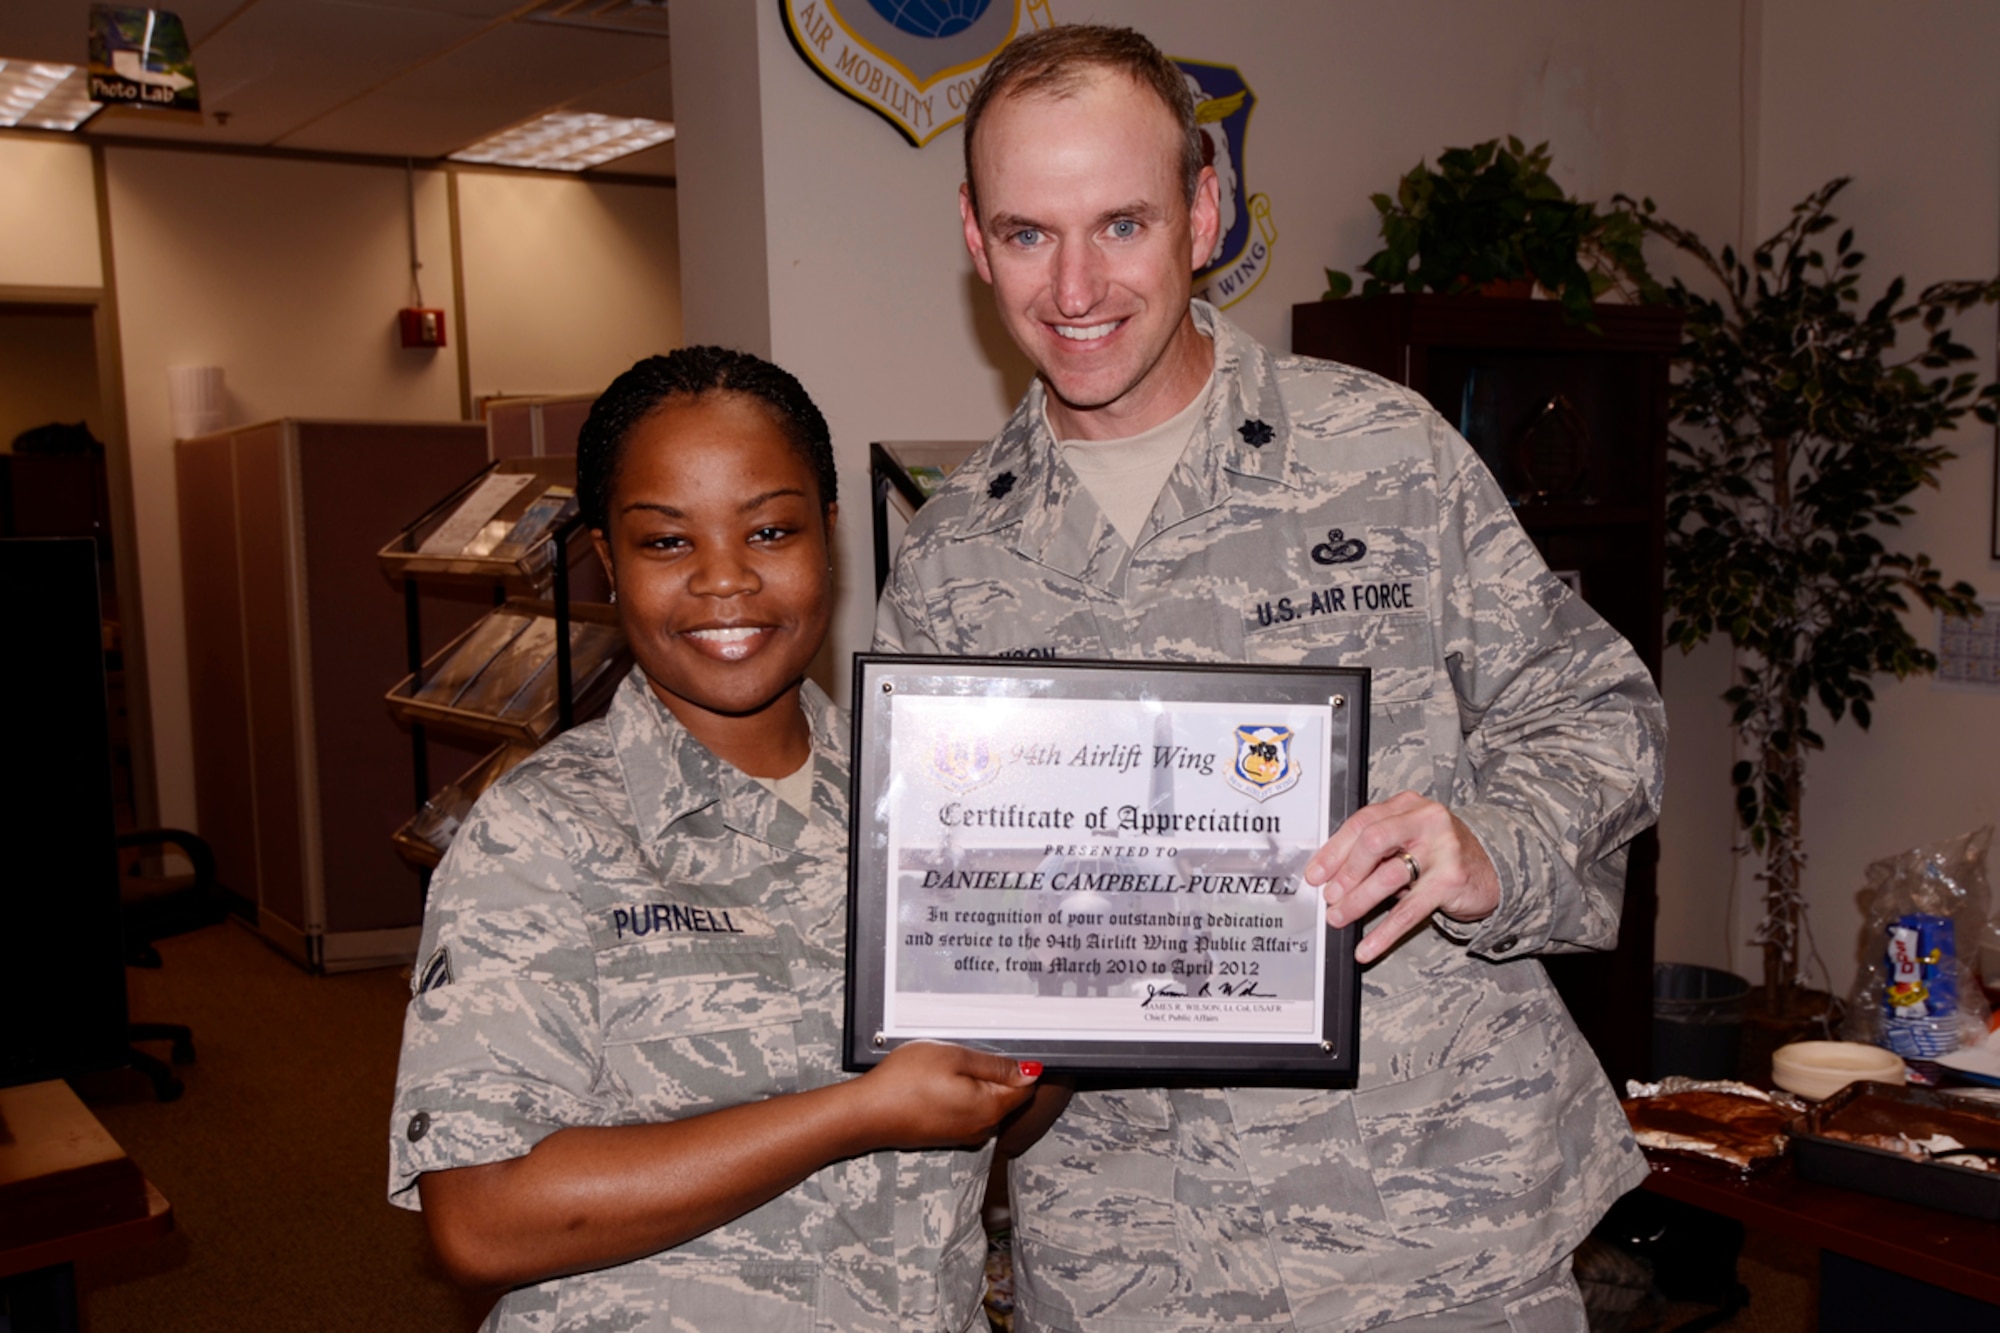 Lt Col Timothy Johnson, 94th Airlift Wing Public Affairs officer, presents Senior Airman Danielle Purnell a certificate of appreciation for her dedication and service to the 94th AW Public Affairs office April 8. Purnell was nominated and to attend Officer Training School and earn a commission through the Deserving Airman Commissioning program. (U.S. Air Force photo/Brad Fallin)